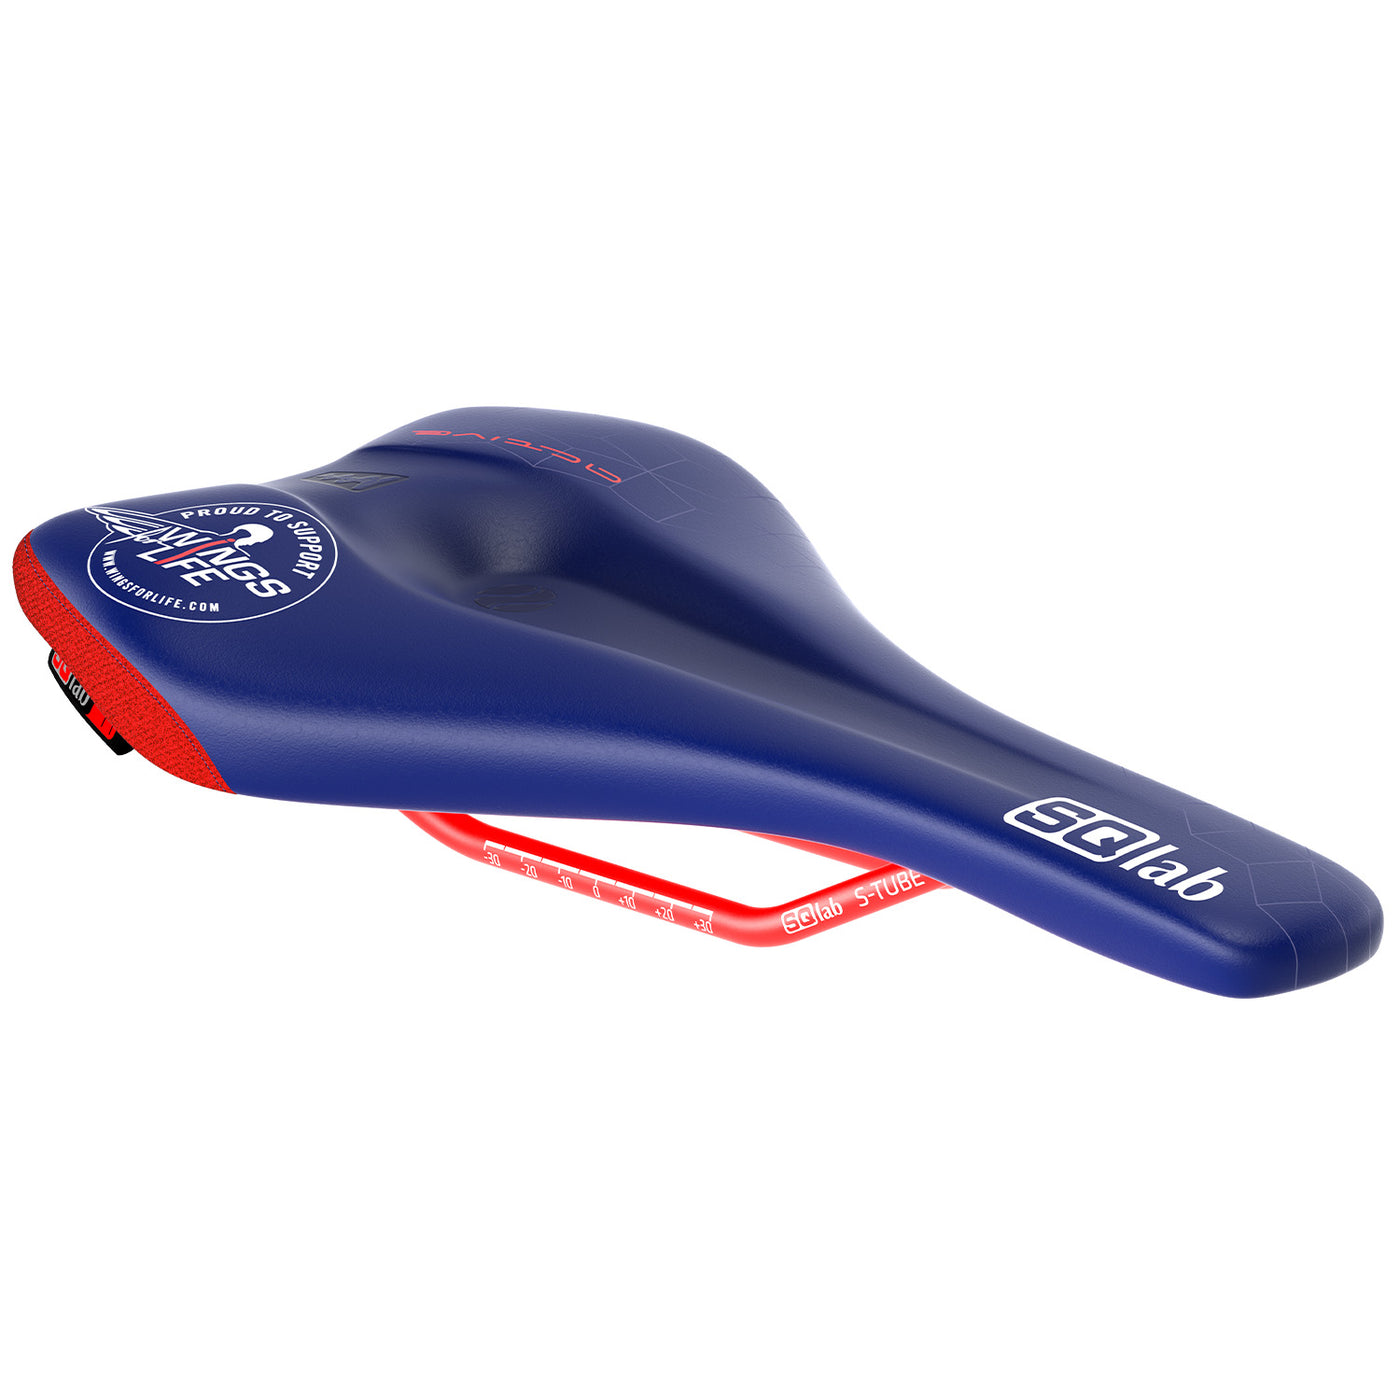 Saddle 611 ERGOWAVE® active 2.1 ltd. Wings for Life